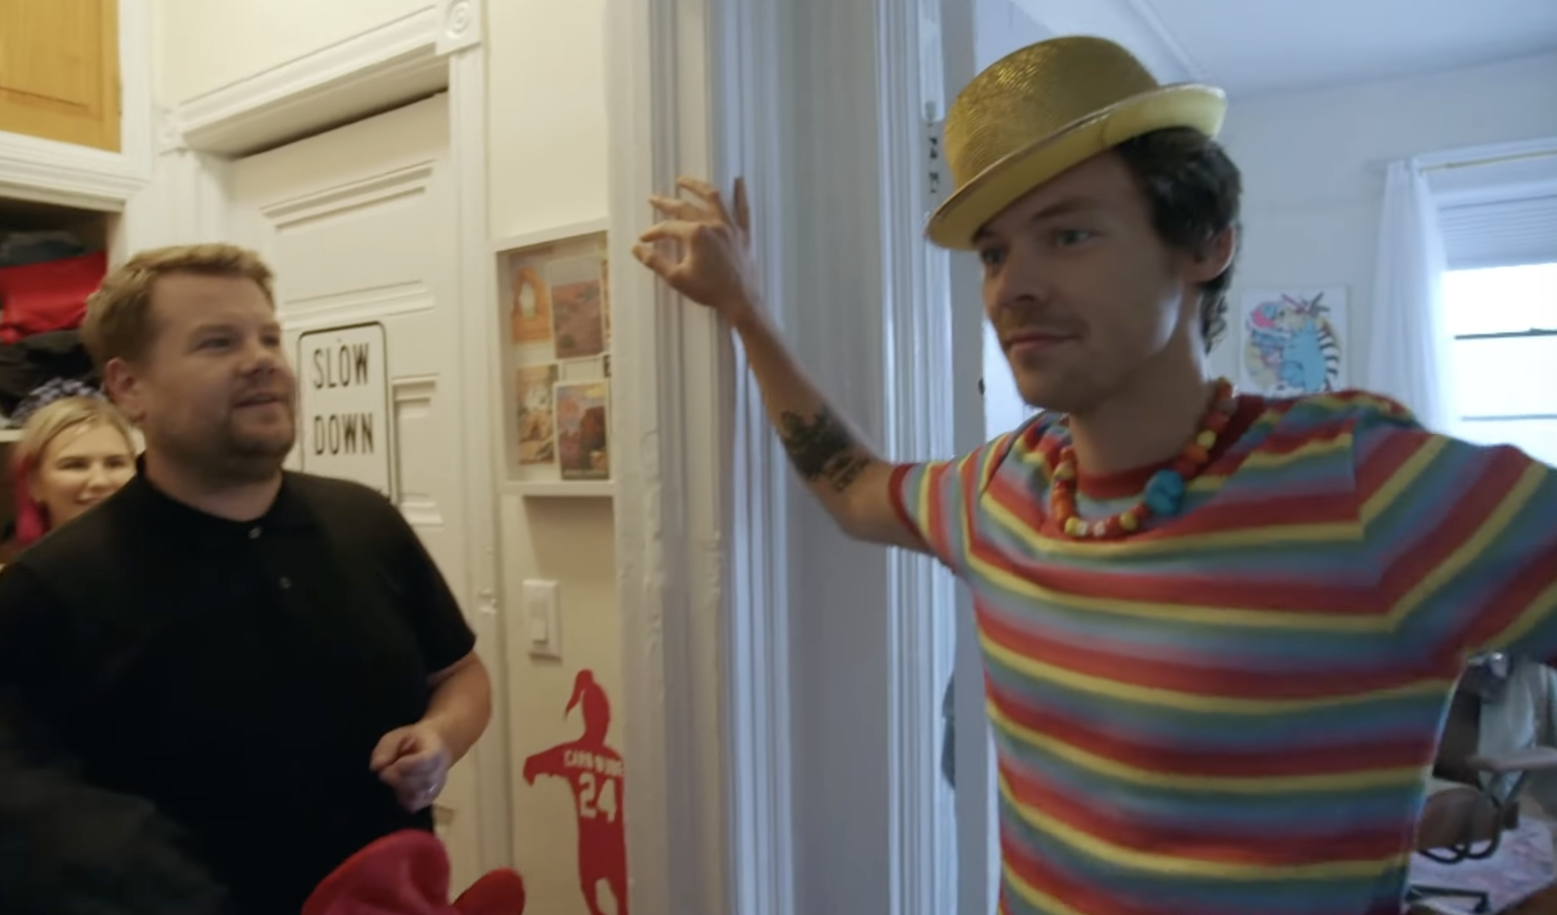 Styles wears a bowler hat, standing in the apartment